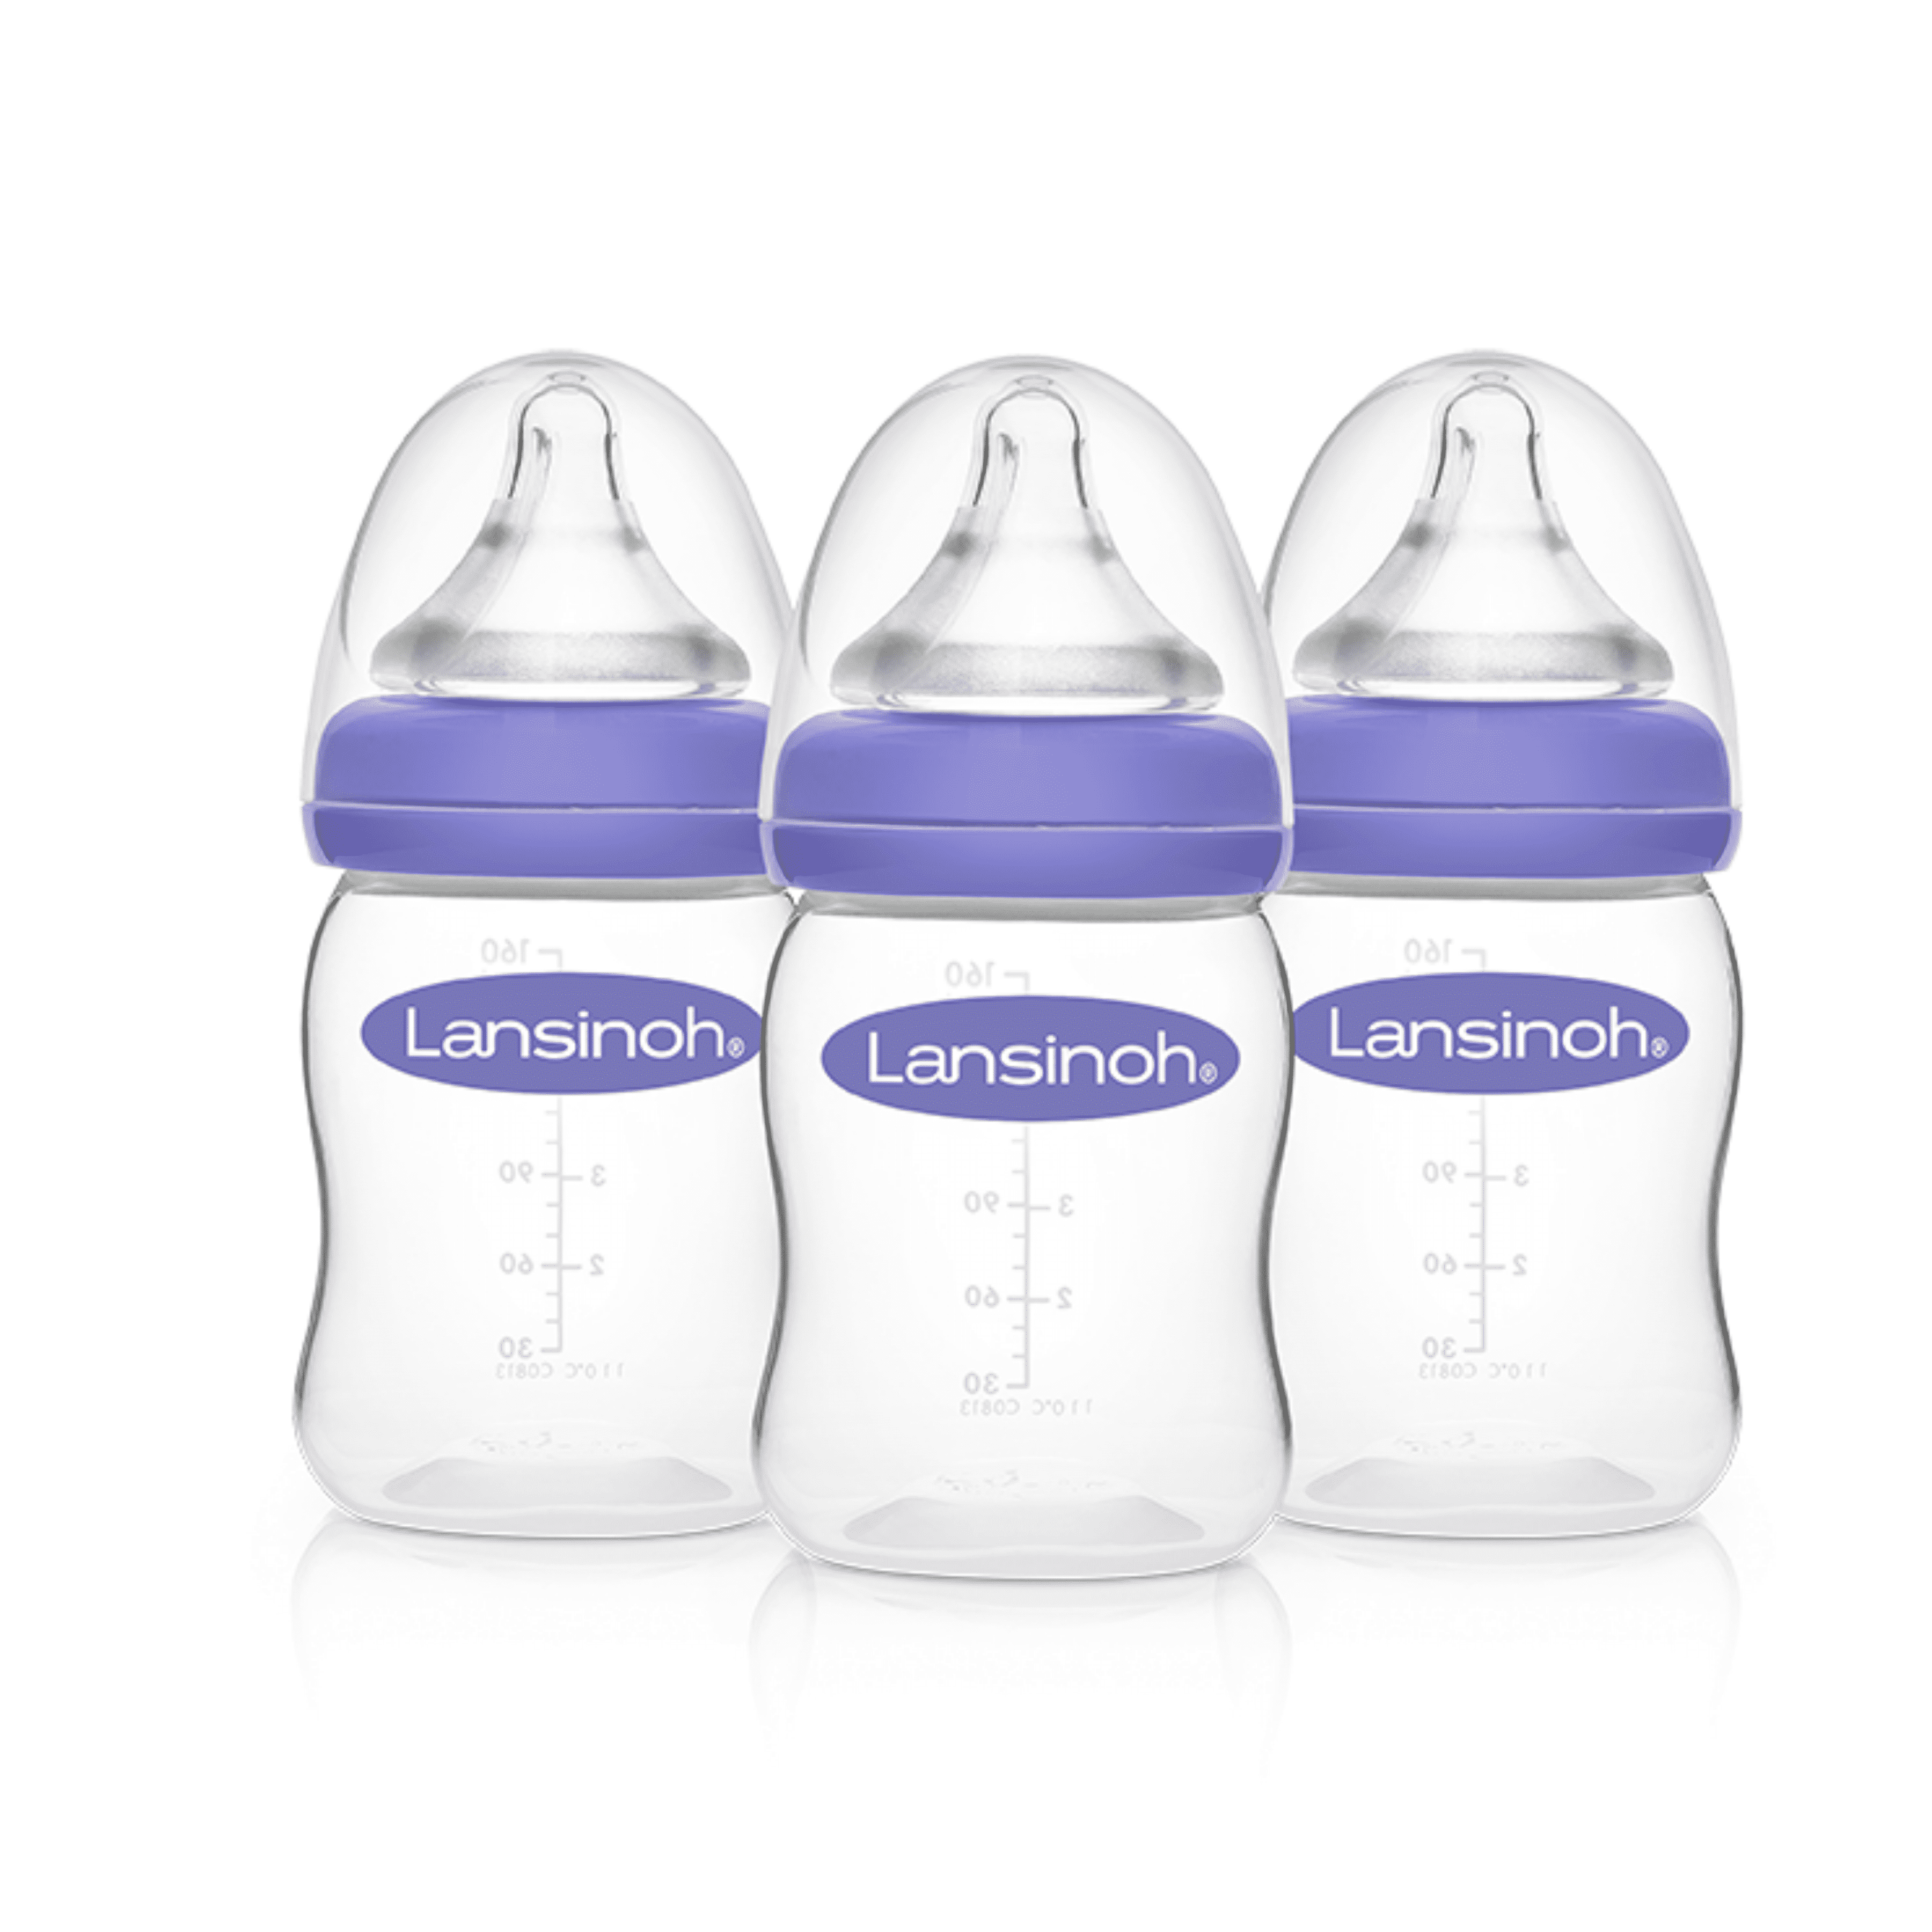 3 count 5 Ounces Lansinoh Baby Bottles for Breastfeeding Babies 